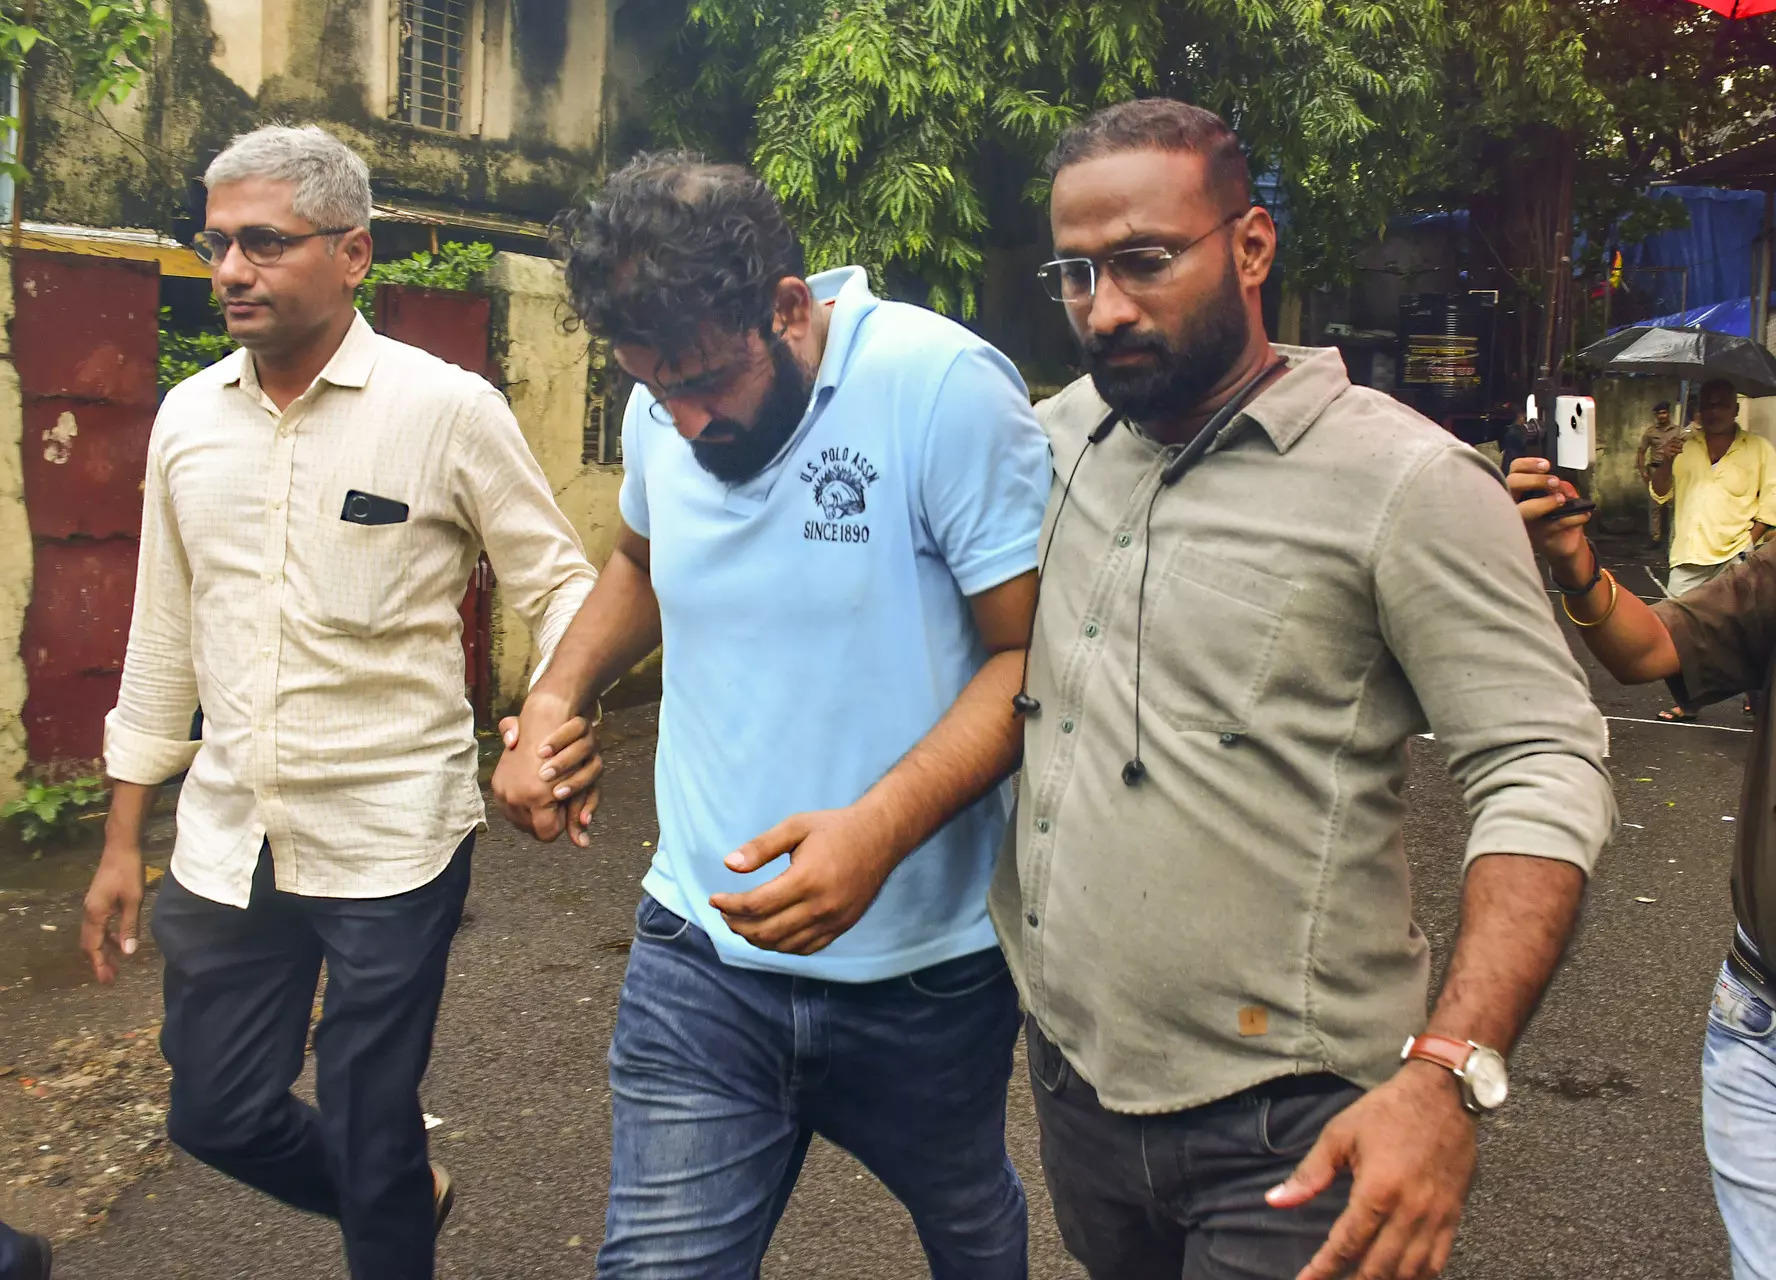 BMW hit-and-run: Mumbai court extends police remand of Sena leader's driver till July 11 